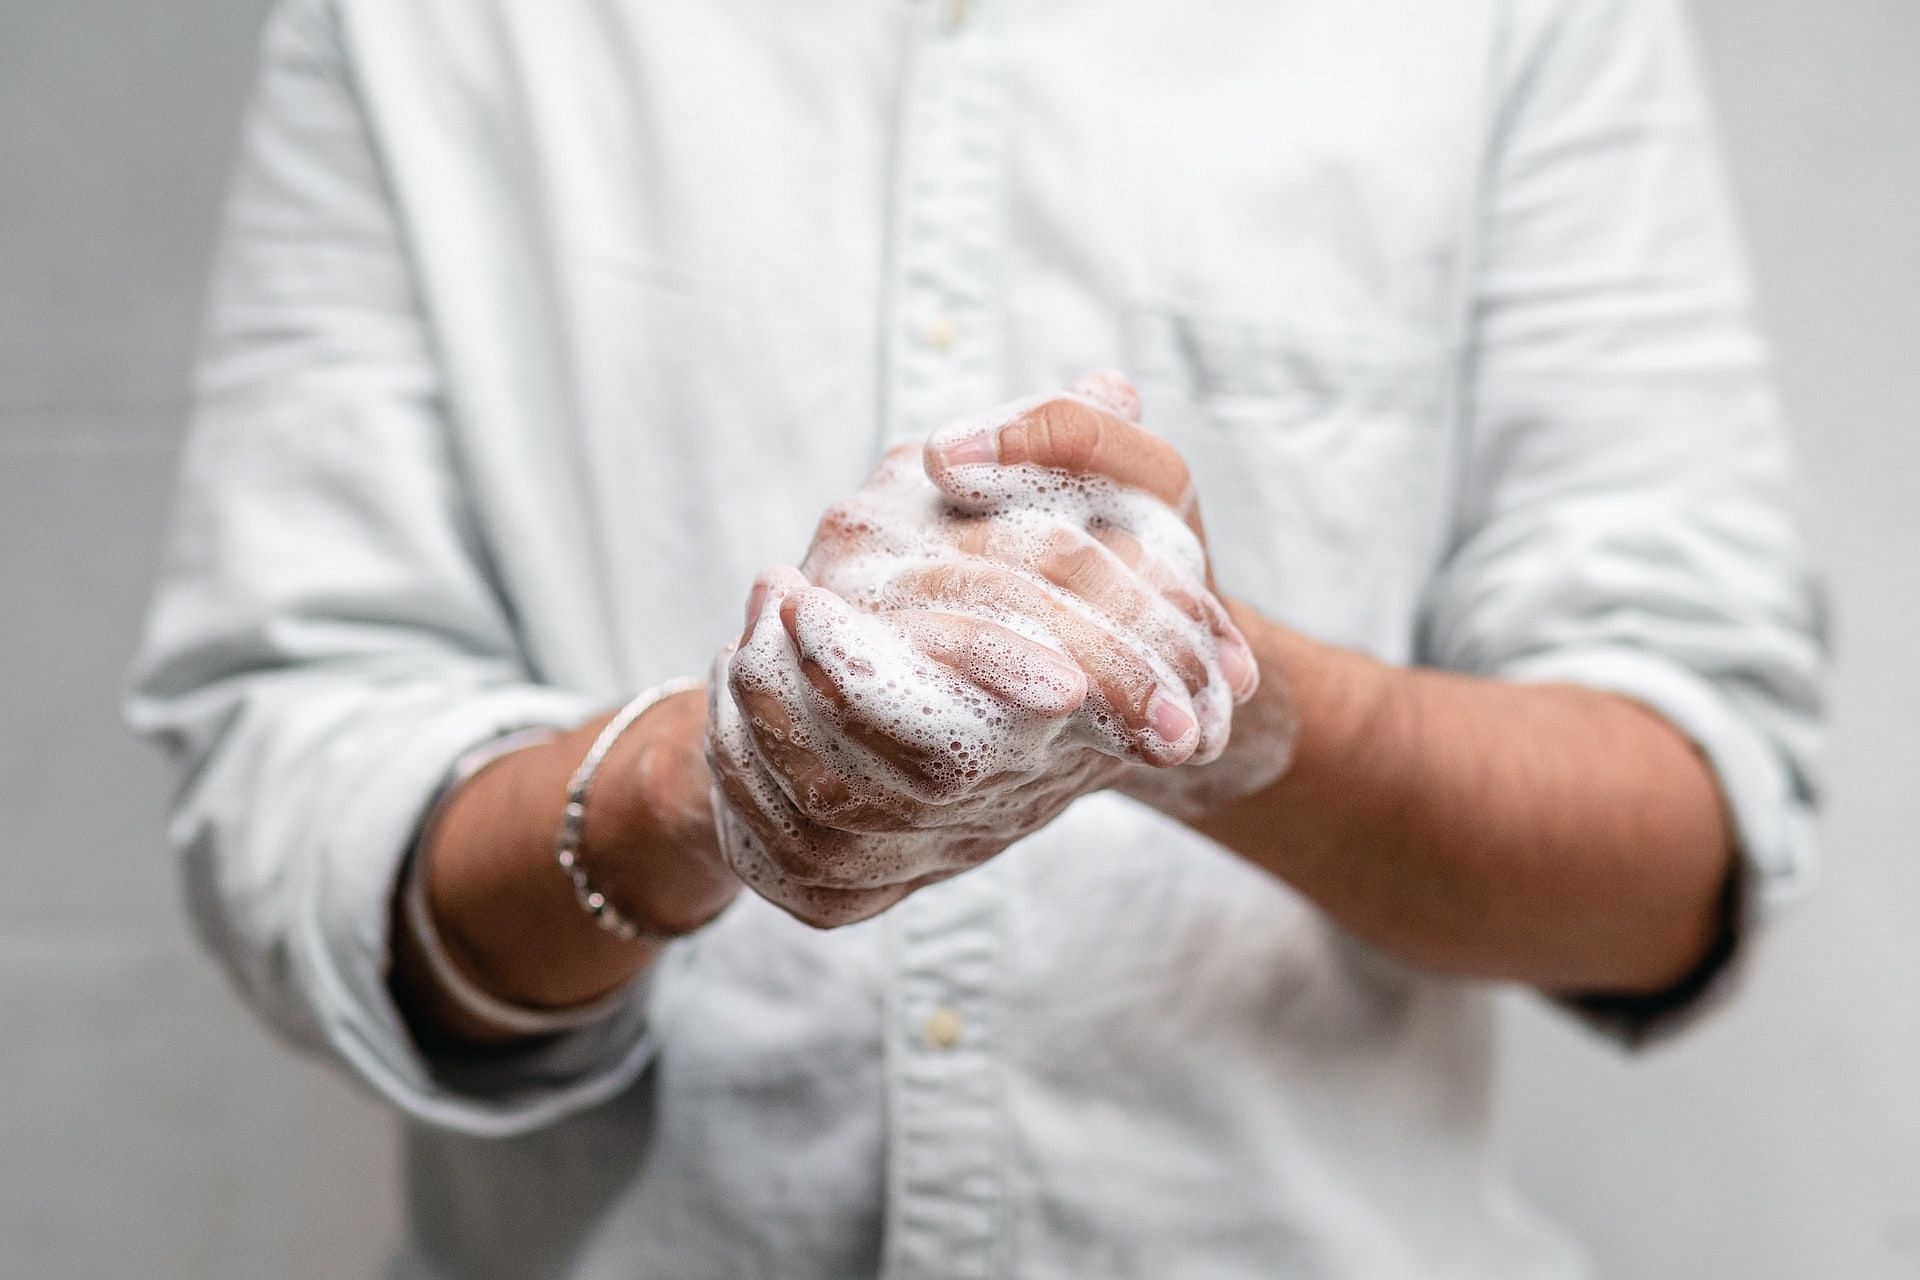 Wash your hands to prevent infections. (Photo via Pexels/Ketut Subiyanto)